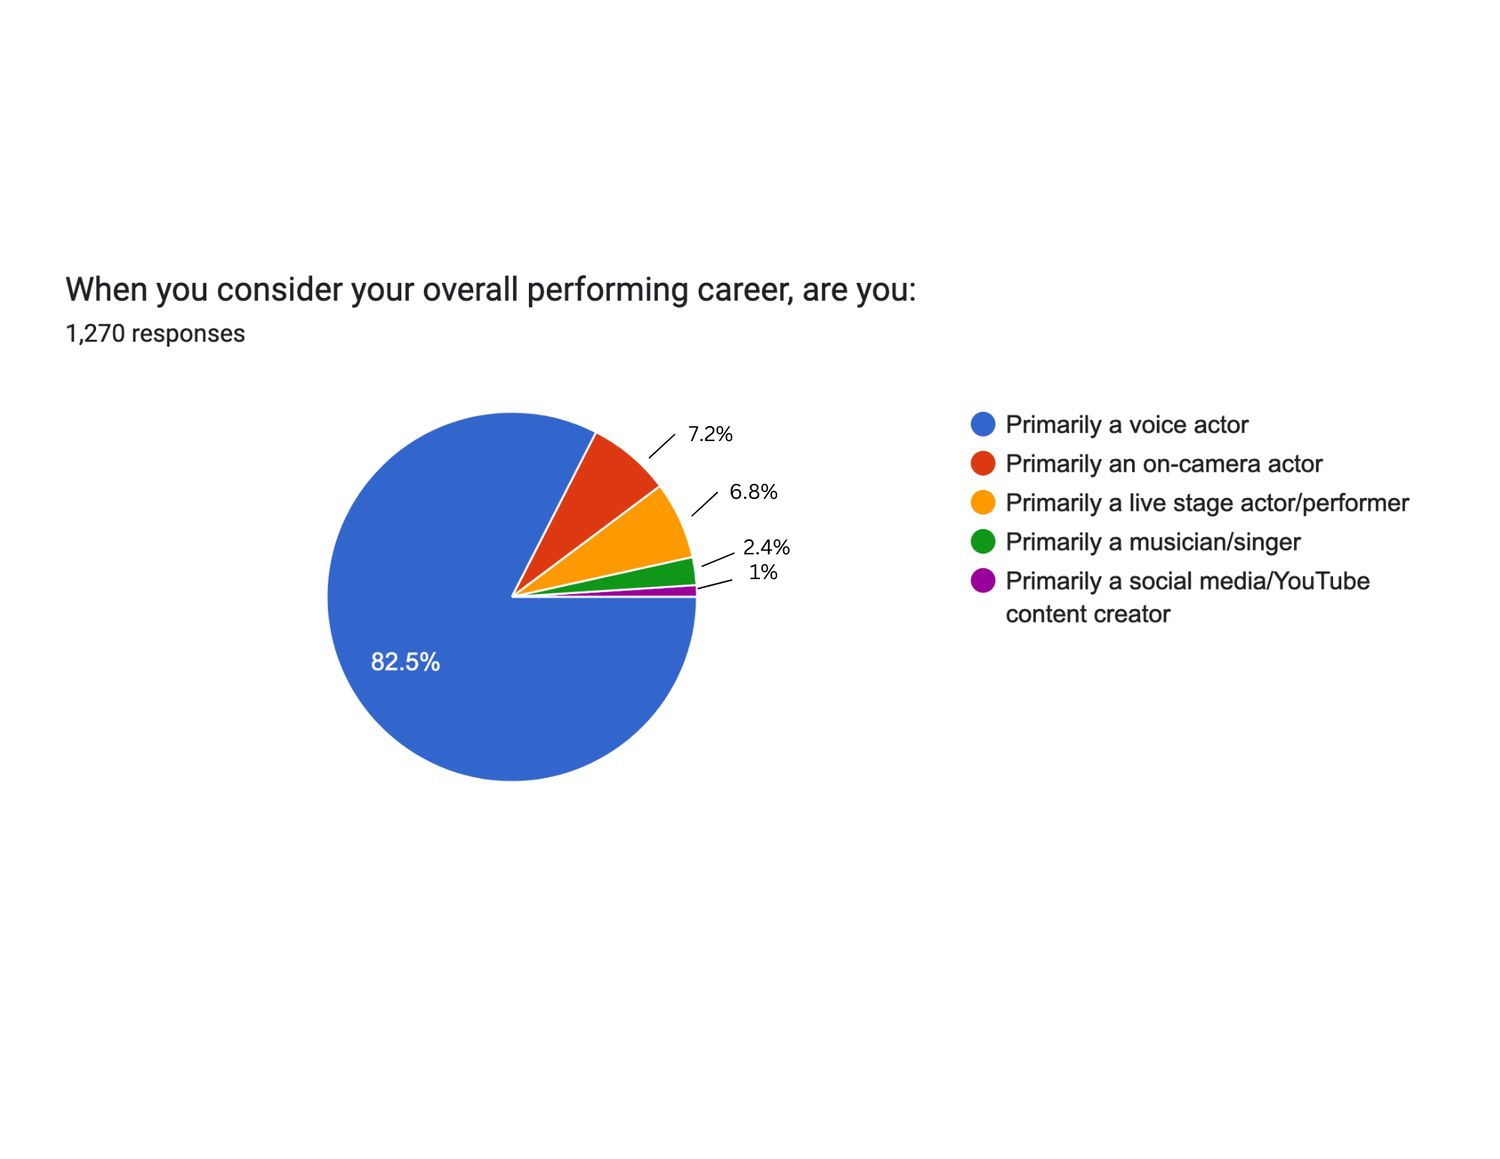 When you consider your overall performing career, are you: